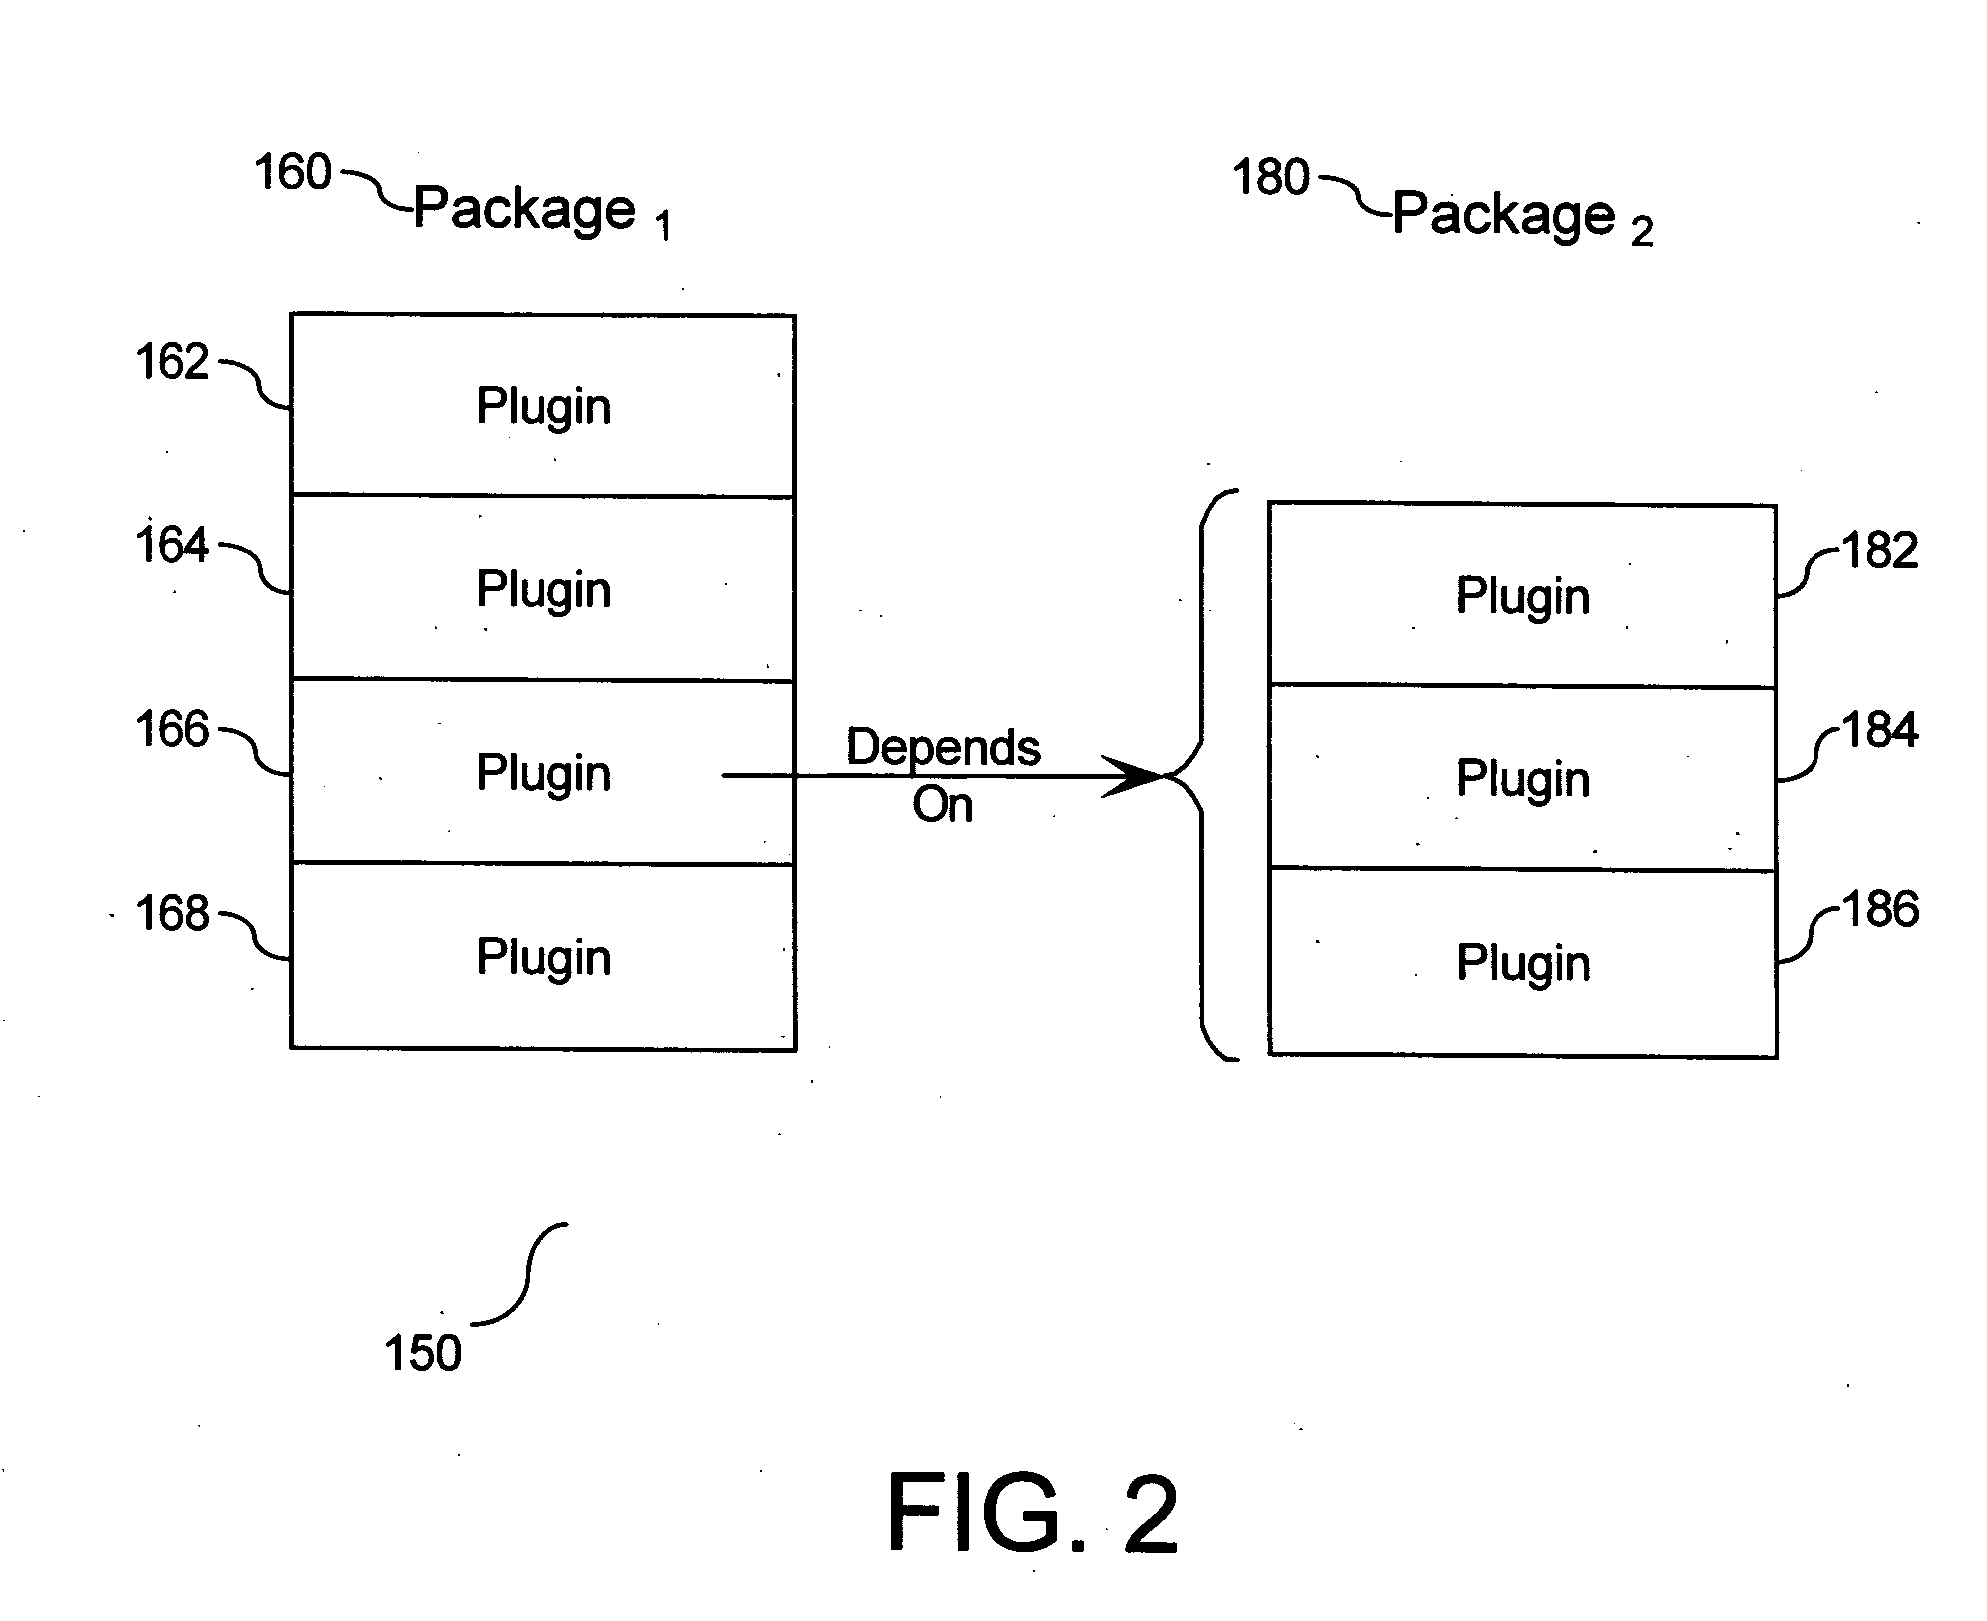 Software packaging model supporting multiple entity types